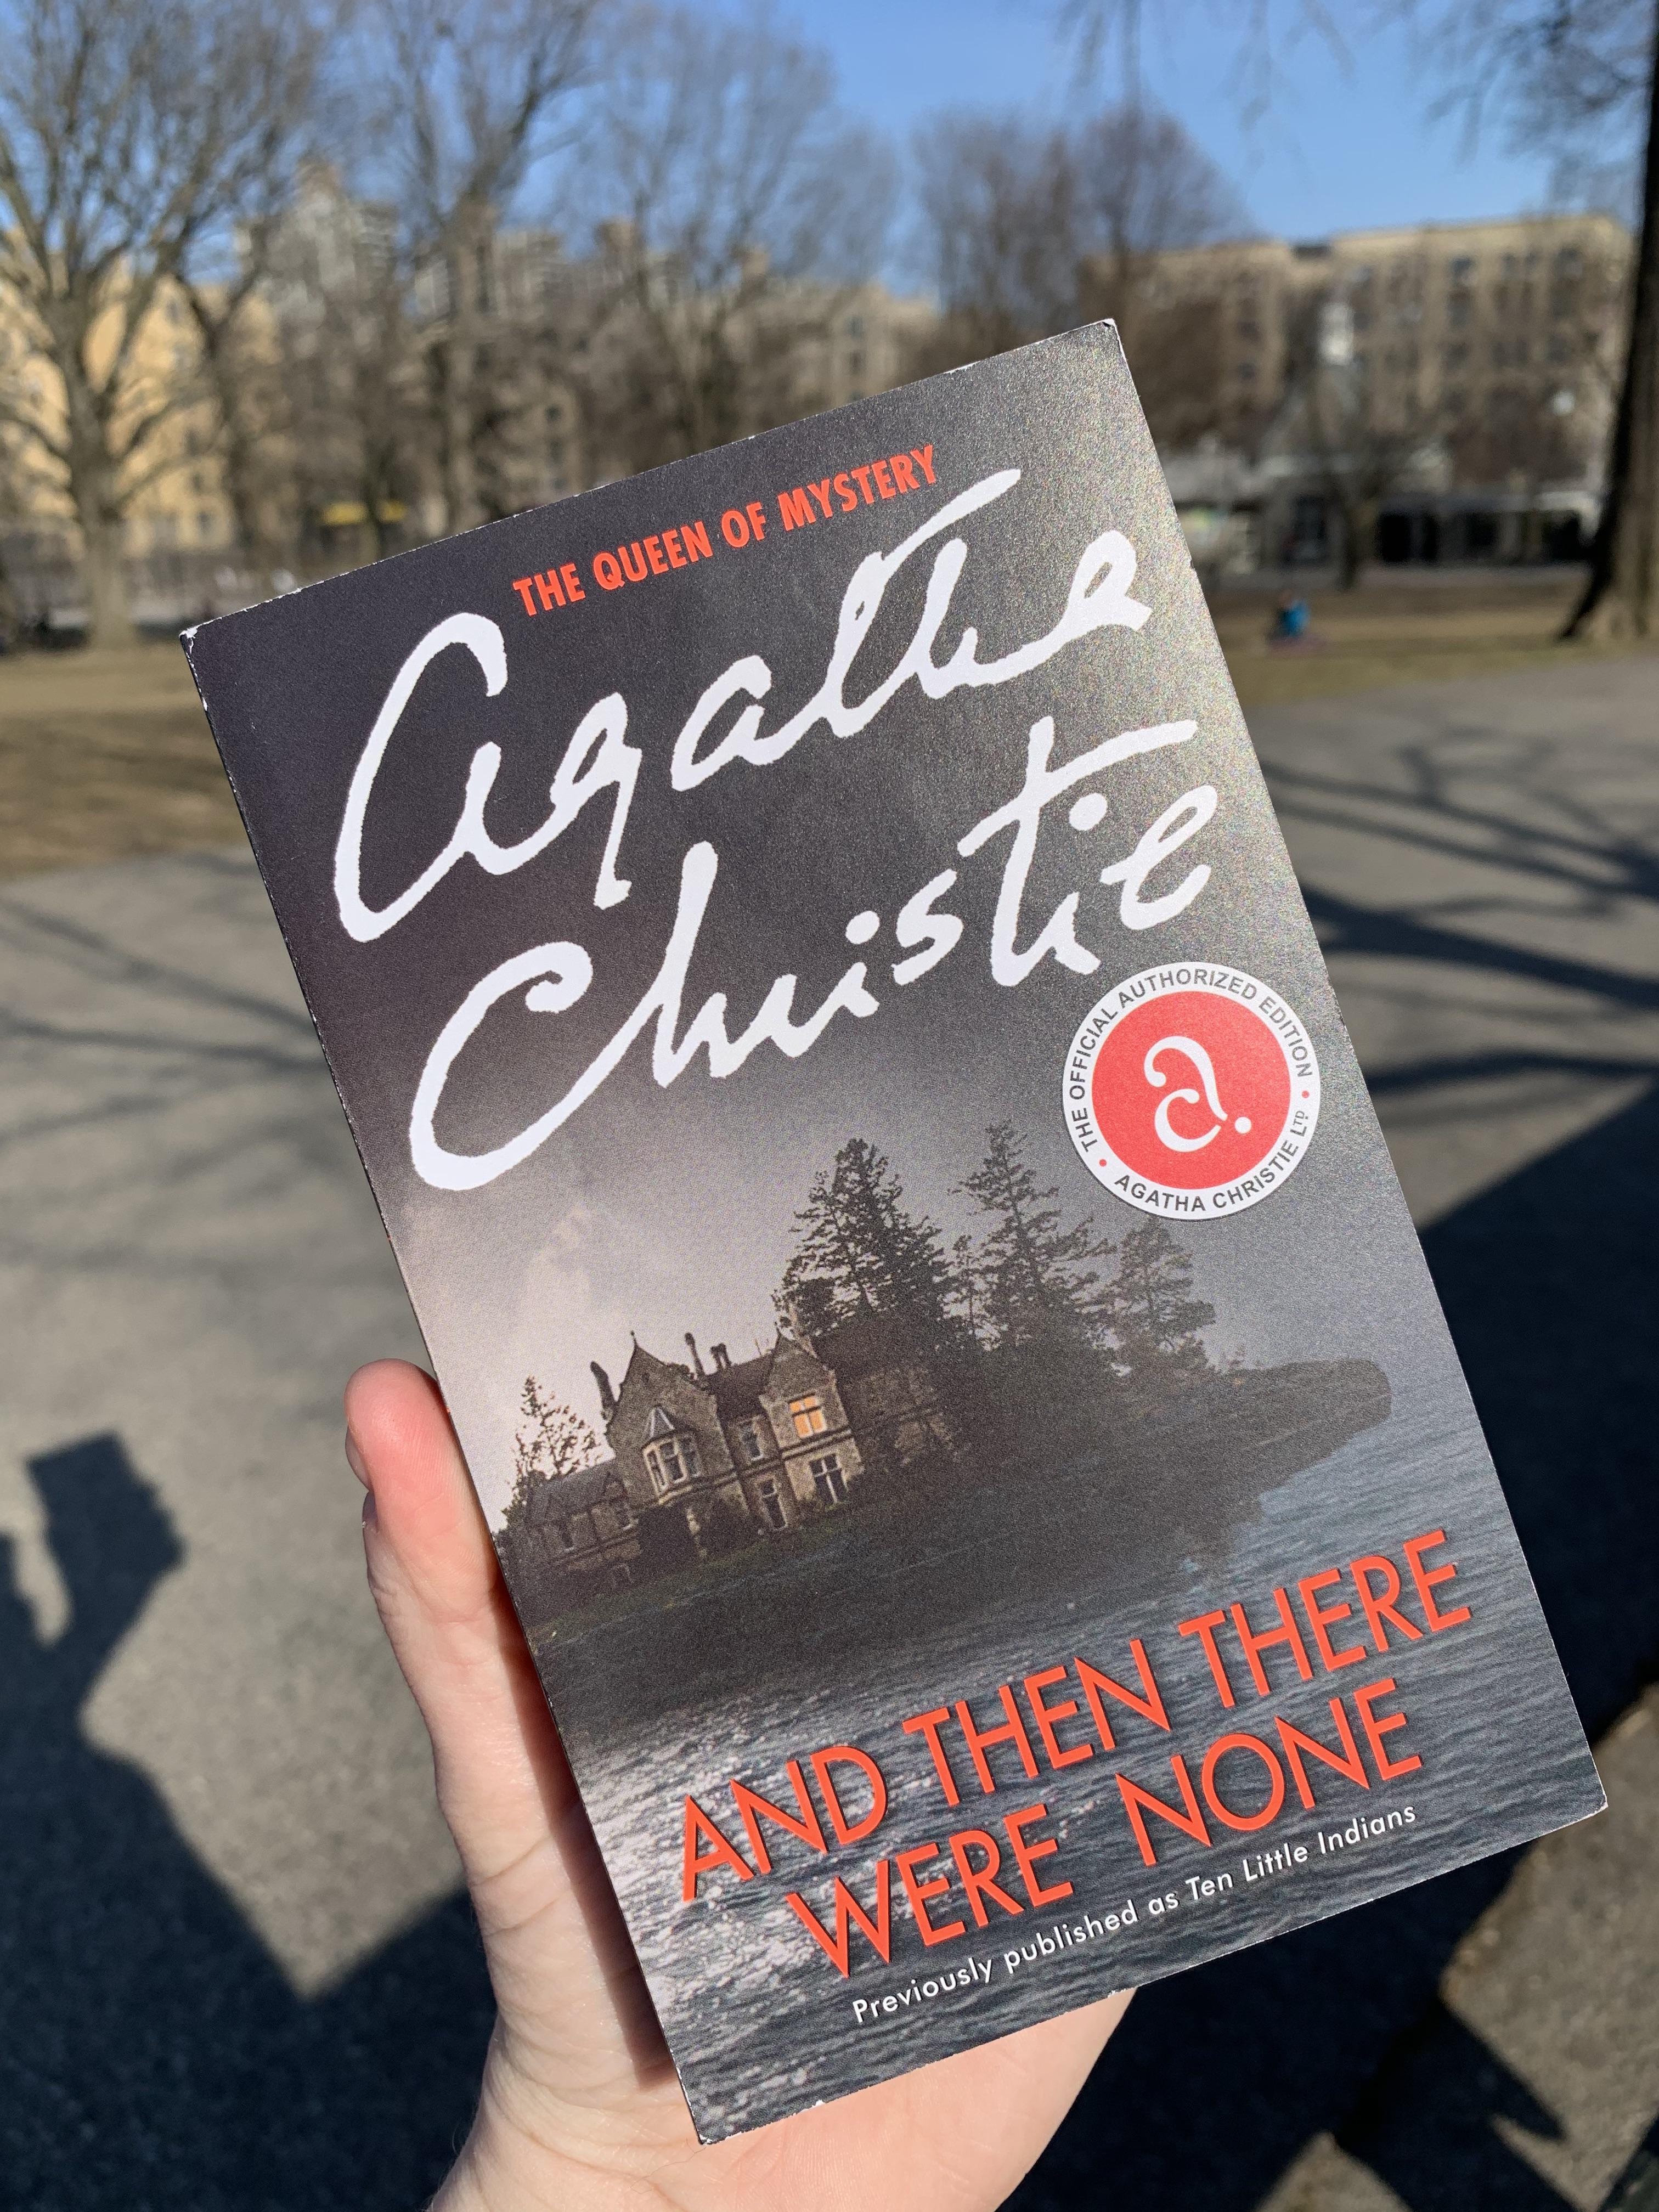 Agatha Christie book "And Then There Were None," being held up to read in the park